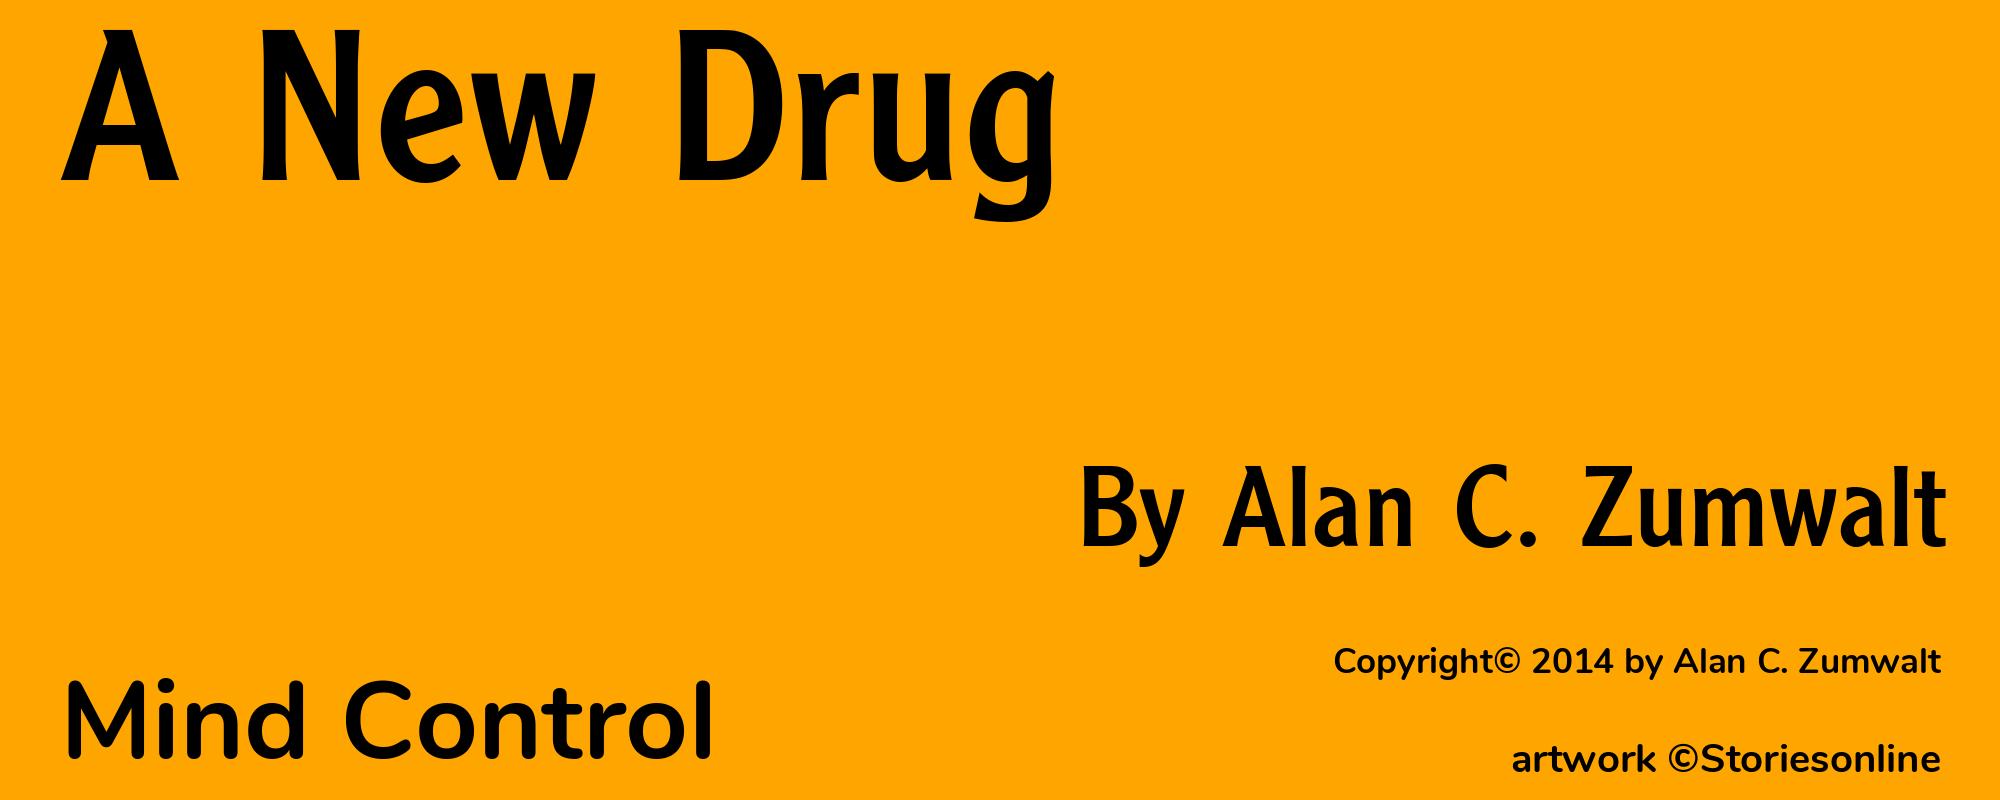 A New Drug - Cover